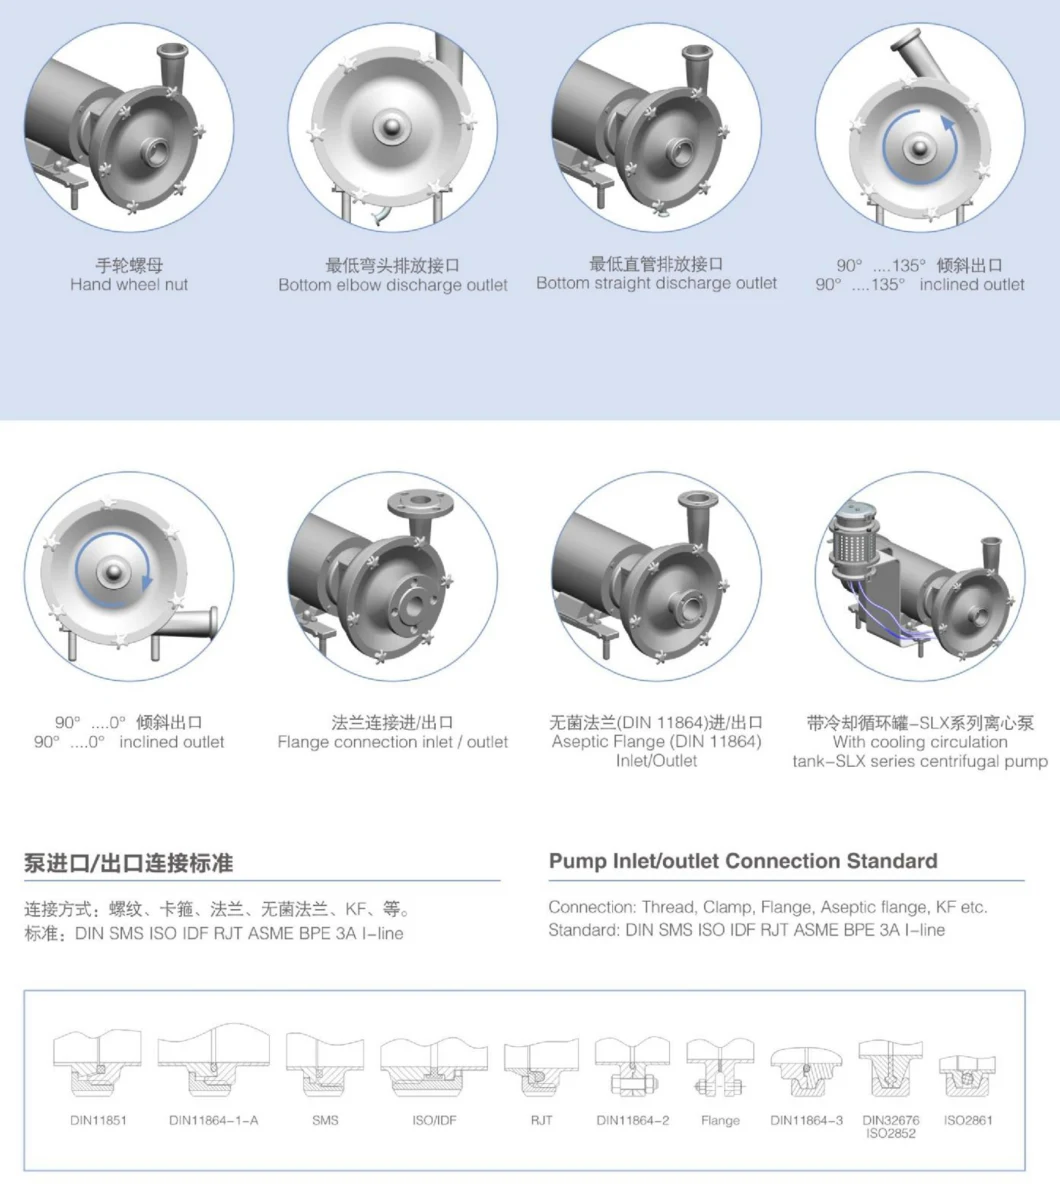 Submersible Beer Centrifugal Impeller Pump with Stainless Steel Motor